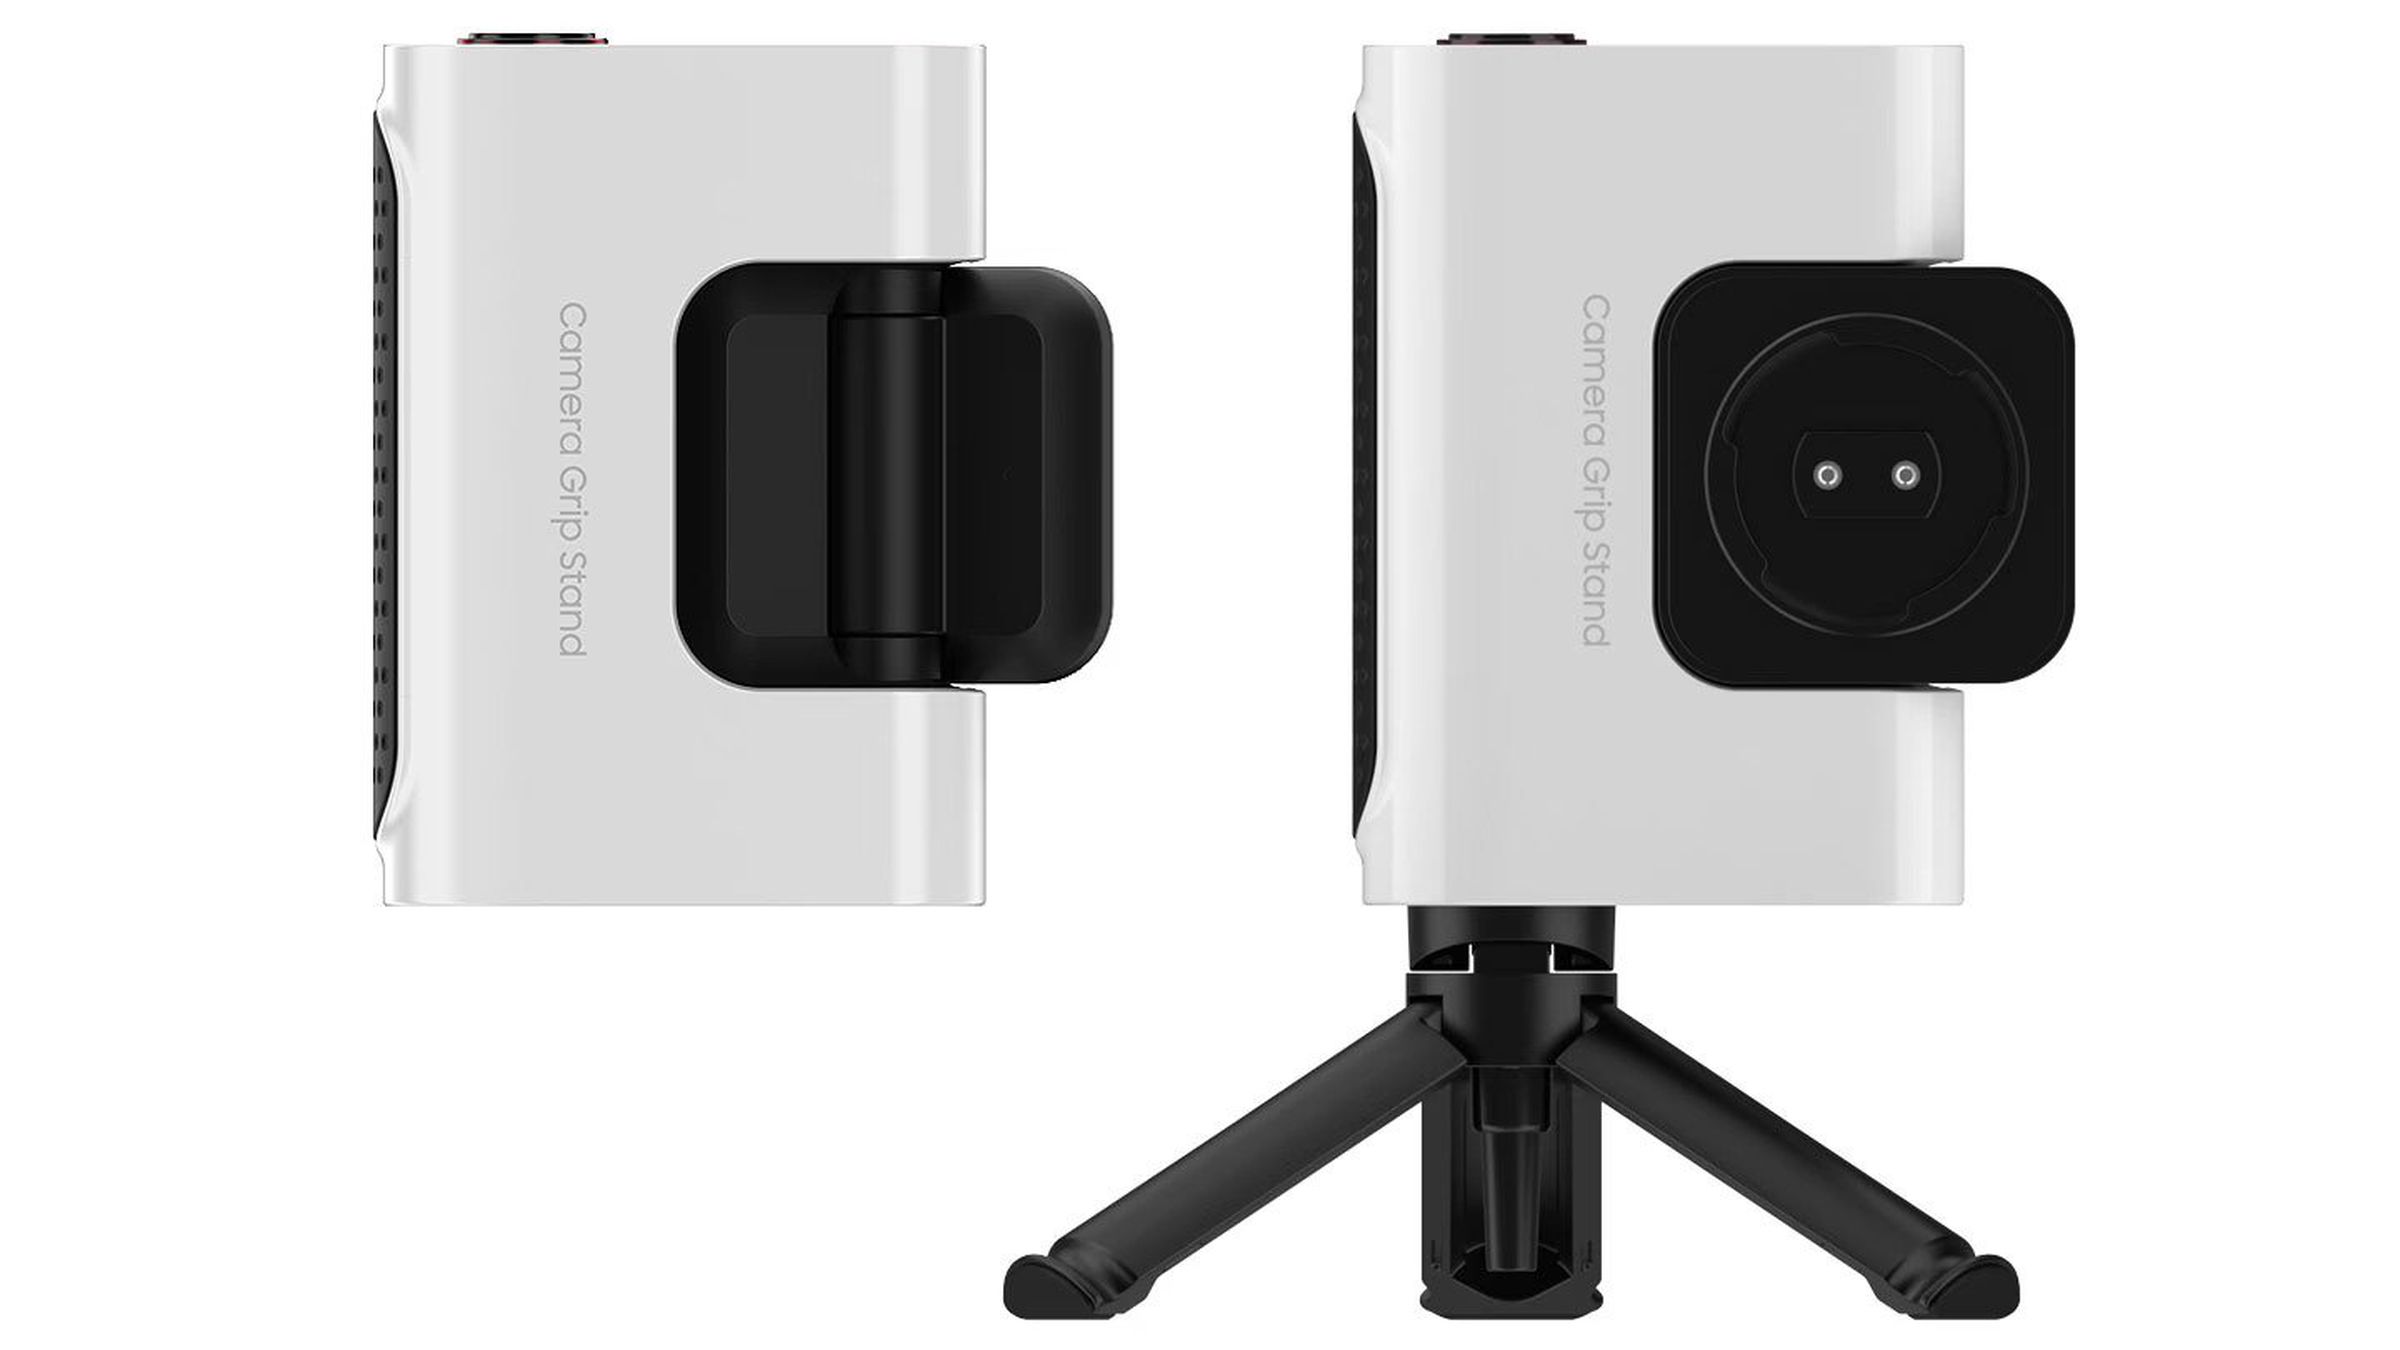 Product shots of the Samsung Camera Grip stand for the Galaxy S23 series.